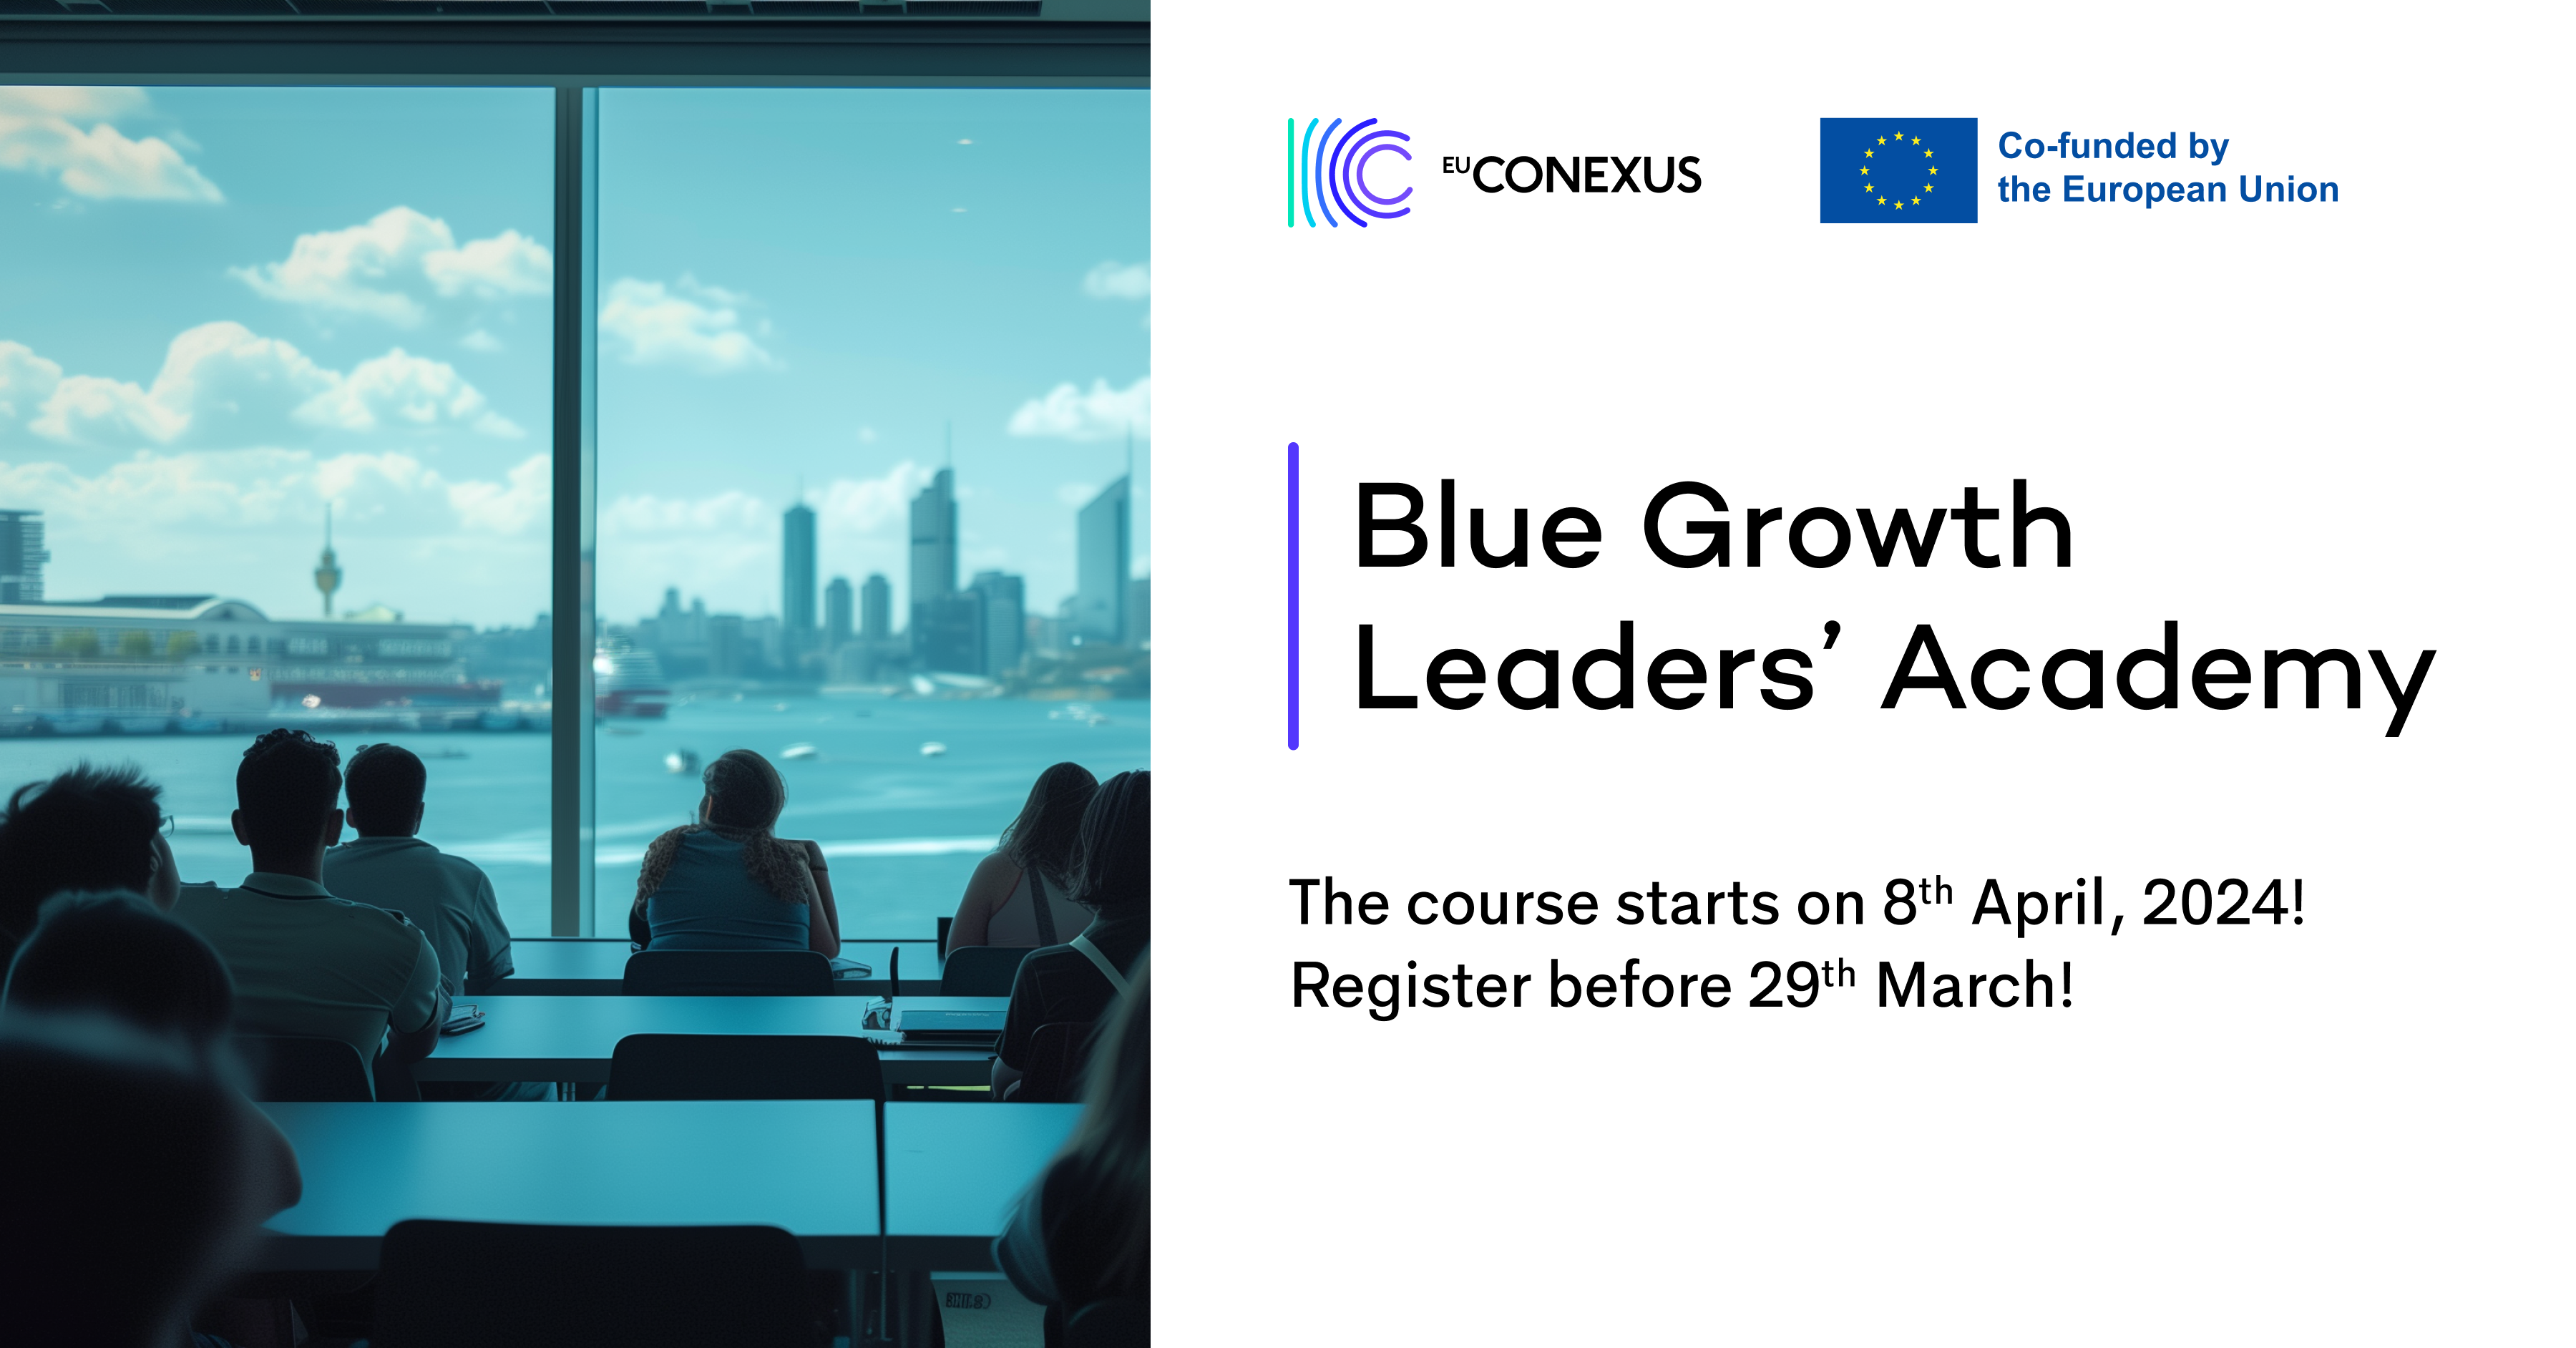 Join the Blue Growth Leaders’ Academy and unlock your potential to lead sustainable change